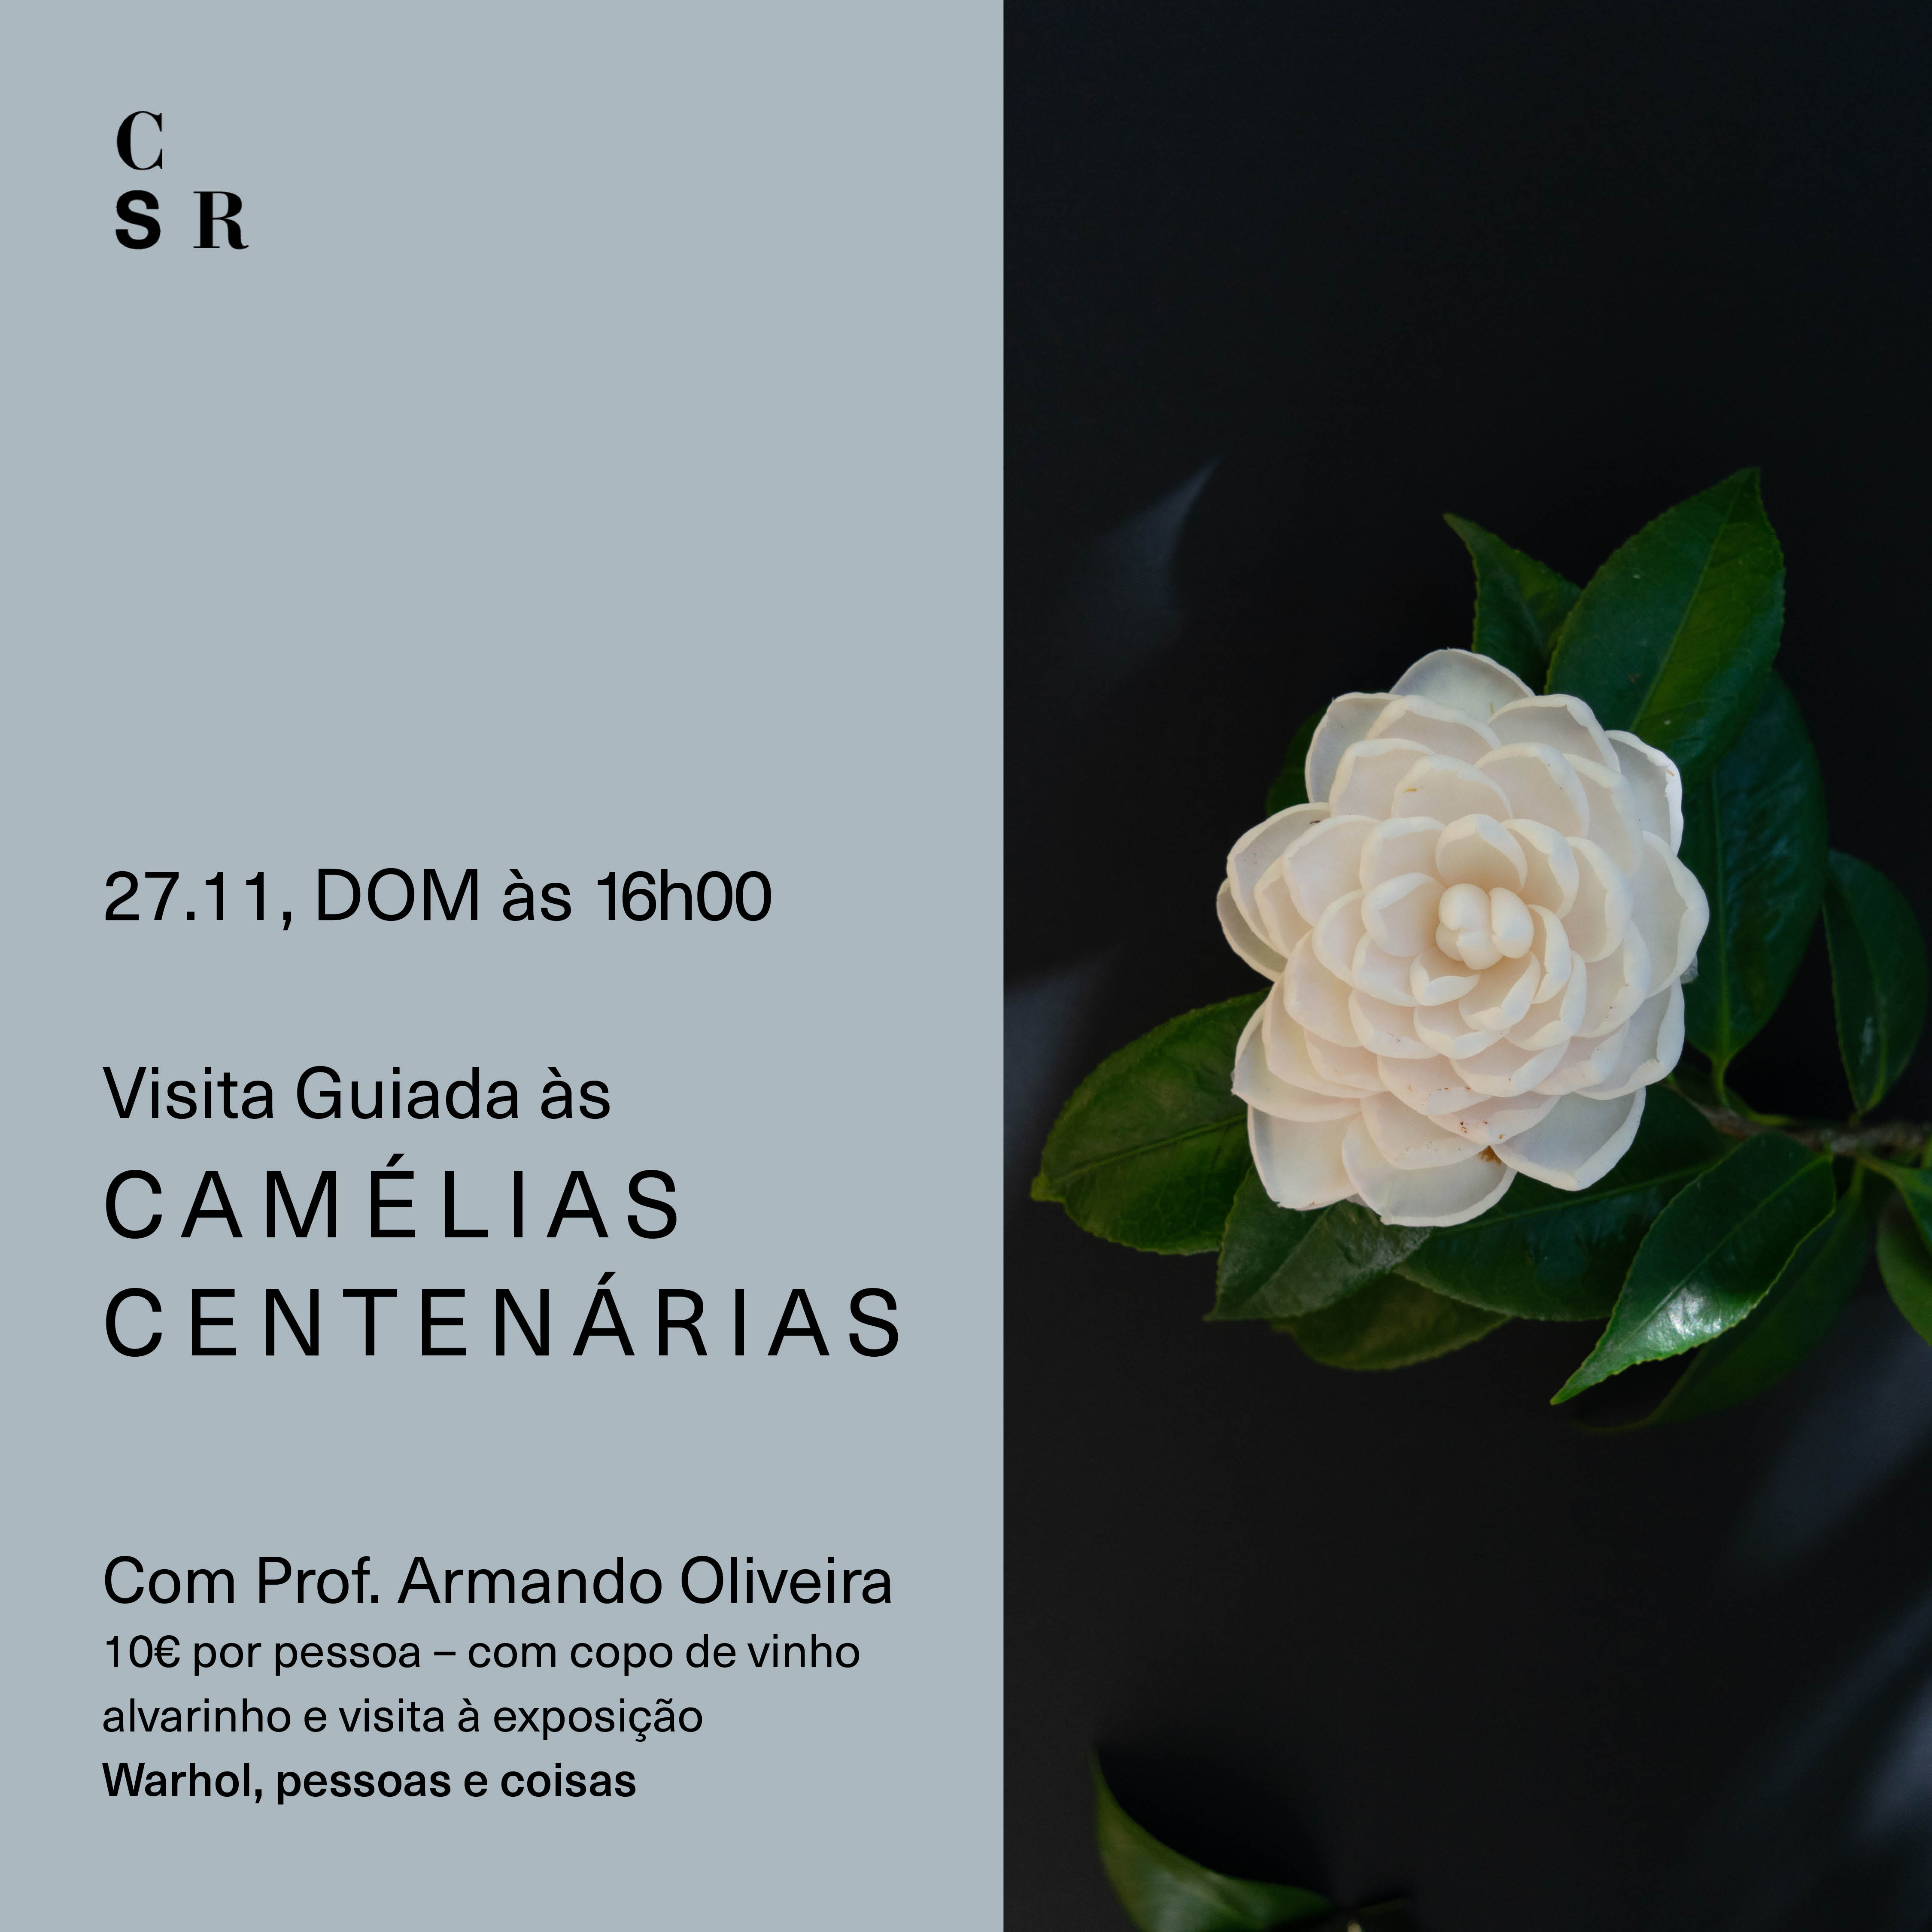 Hundred-year-old Camelias - Event